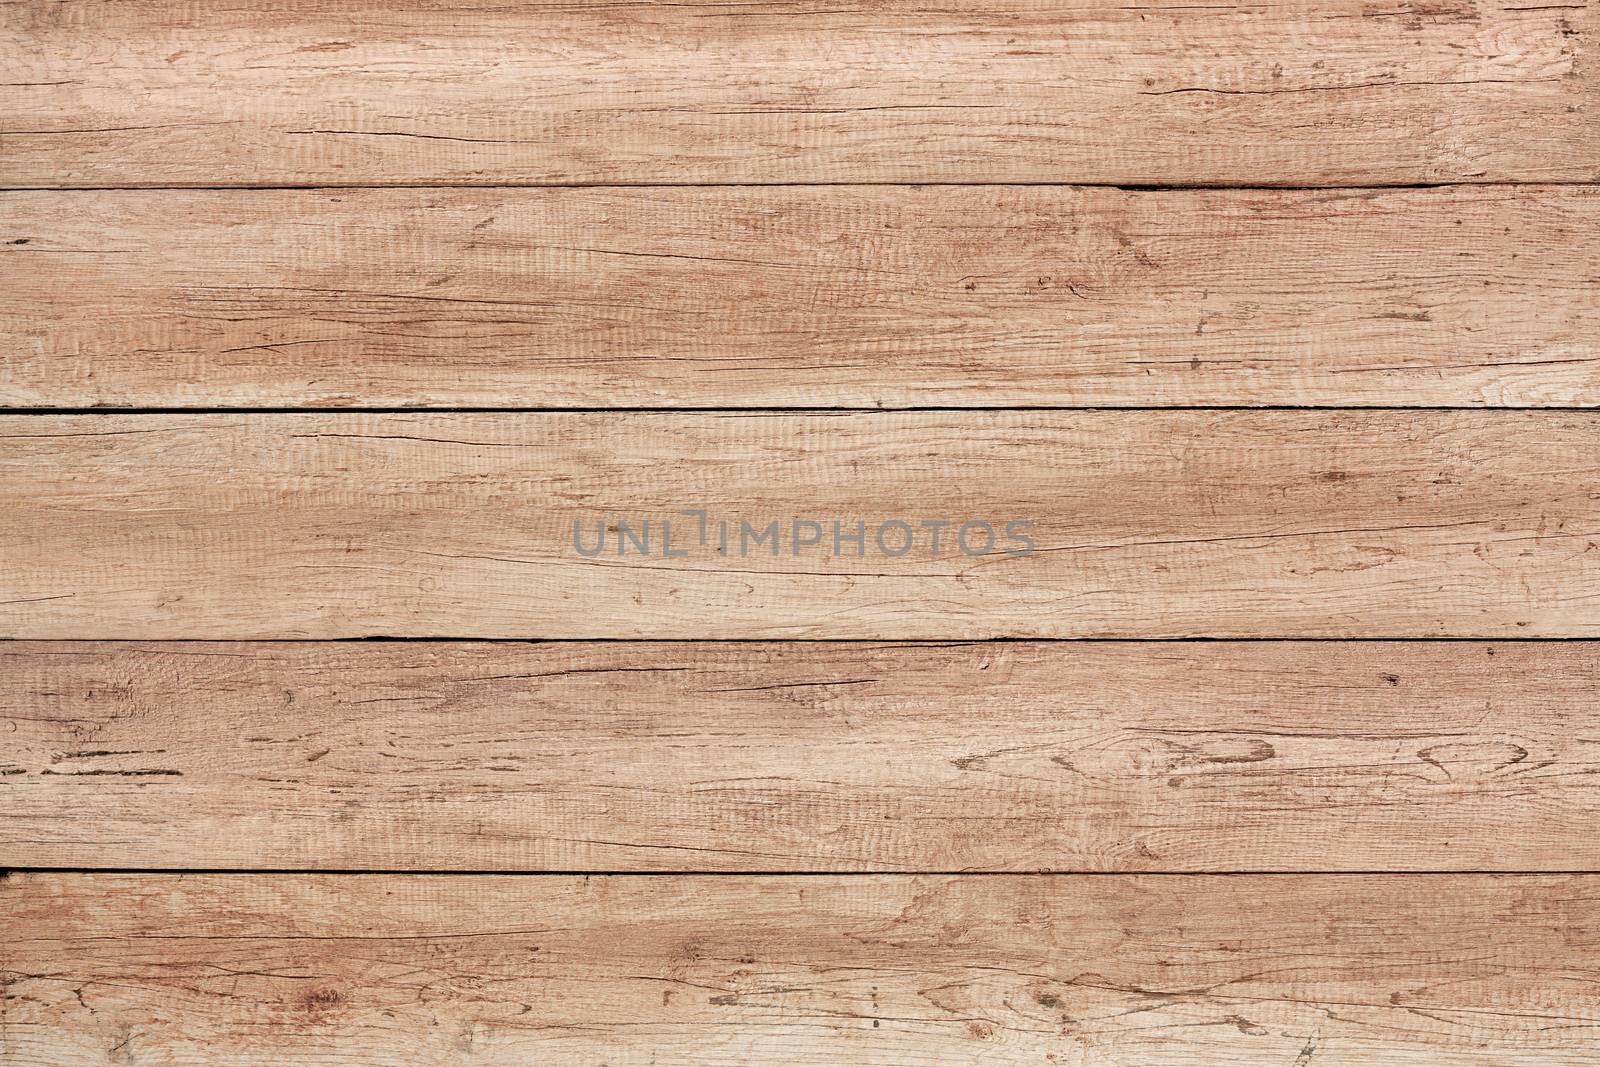 Old weathered wood surface with long boards lined up. Wooden planks on a wall or floor with grain and texture. Light neutral tones.